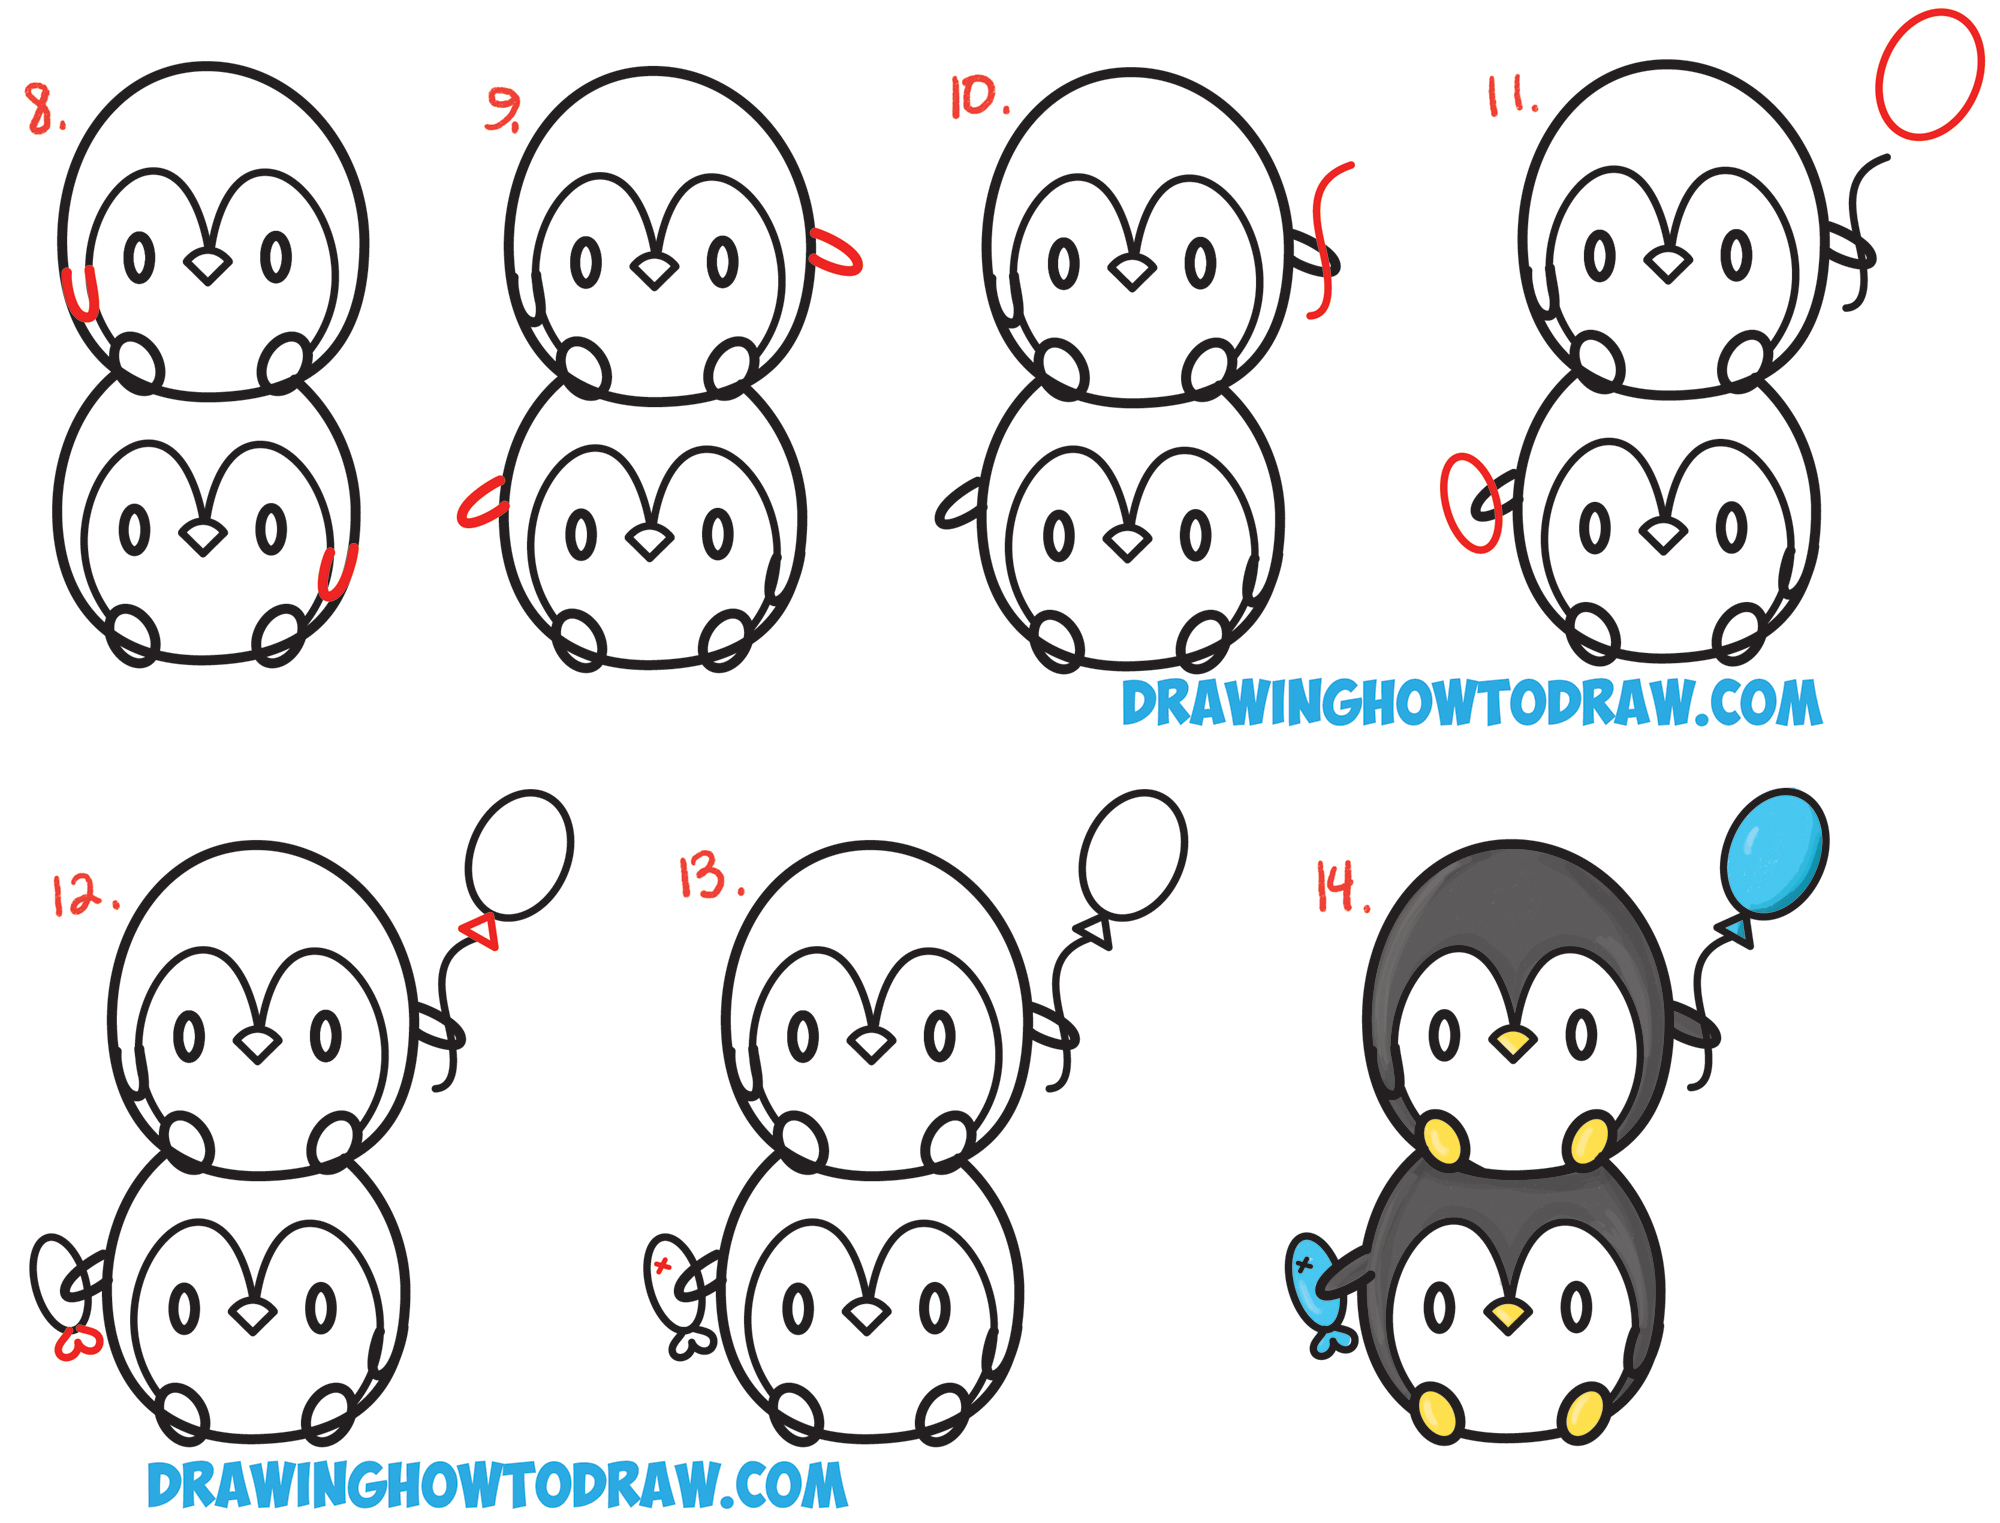 Trending Step How To Draw Cute Animals Tips - Temal